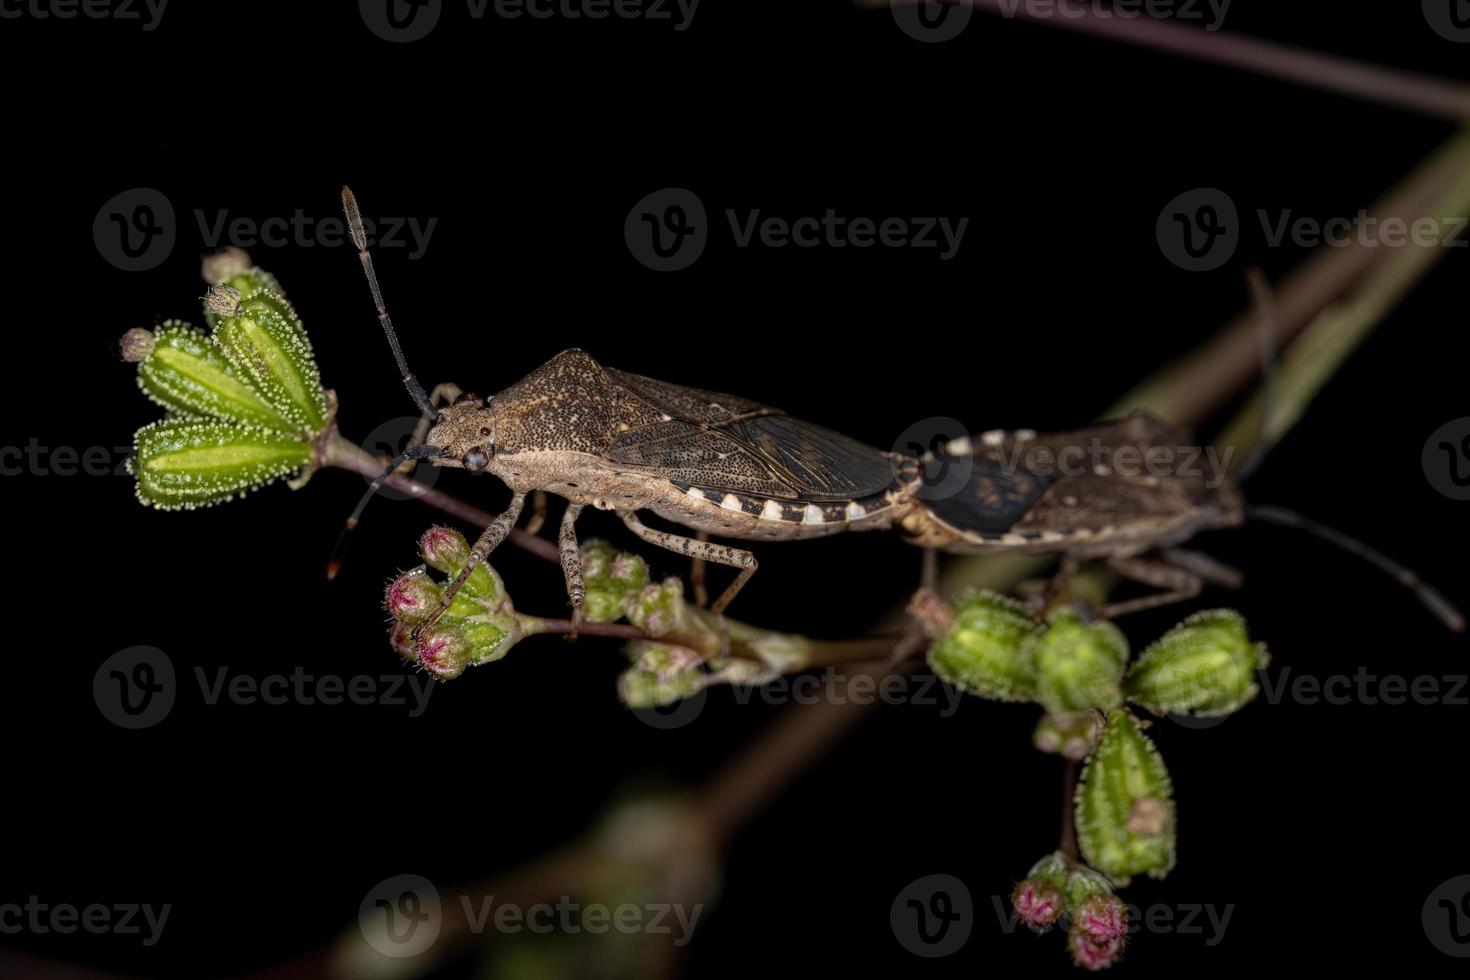 Adult Leaf-footed Bugs photo